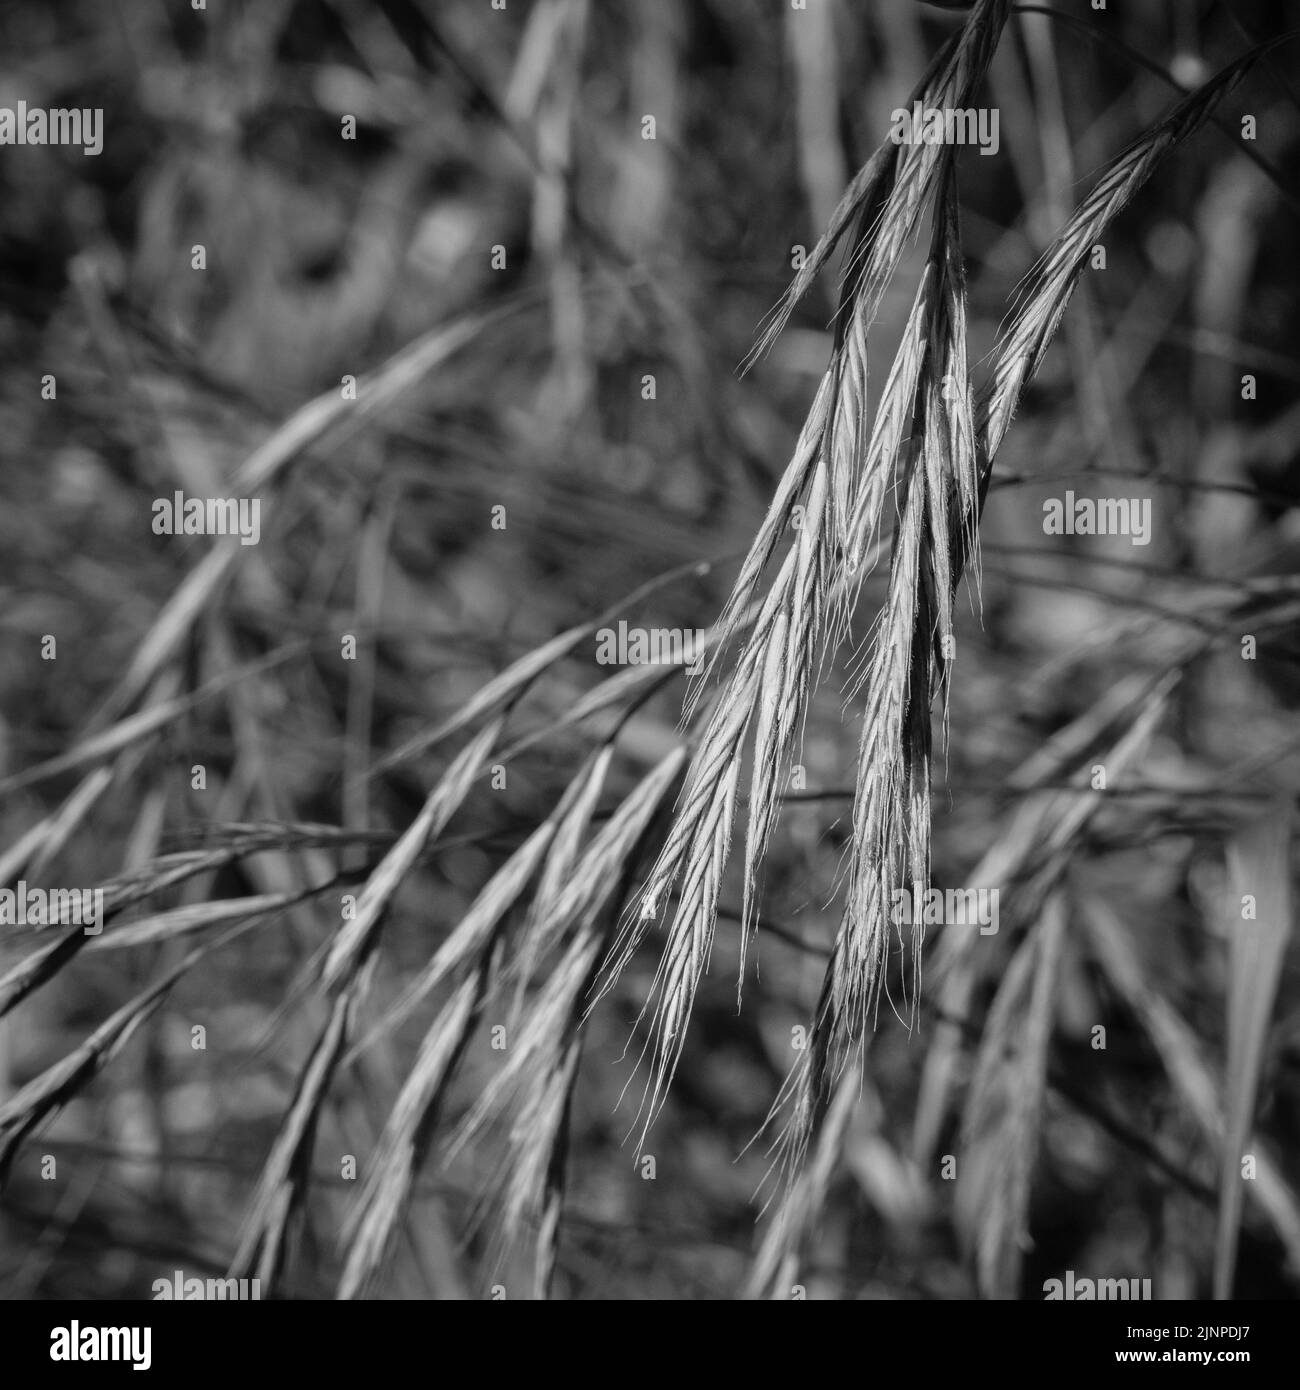 Drooping flower head of a wild grass in a grass verge. Abstract wild plants, wild grasses, weeds growing wild. Stock Photo